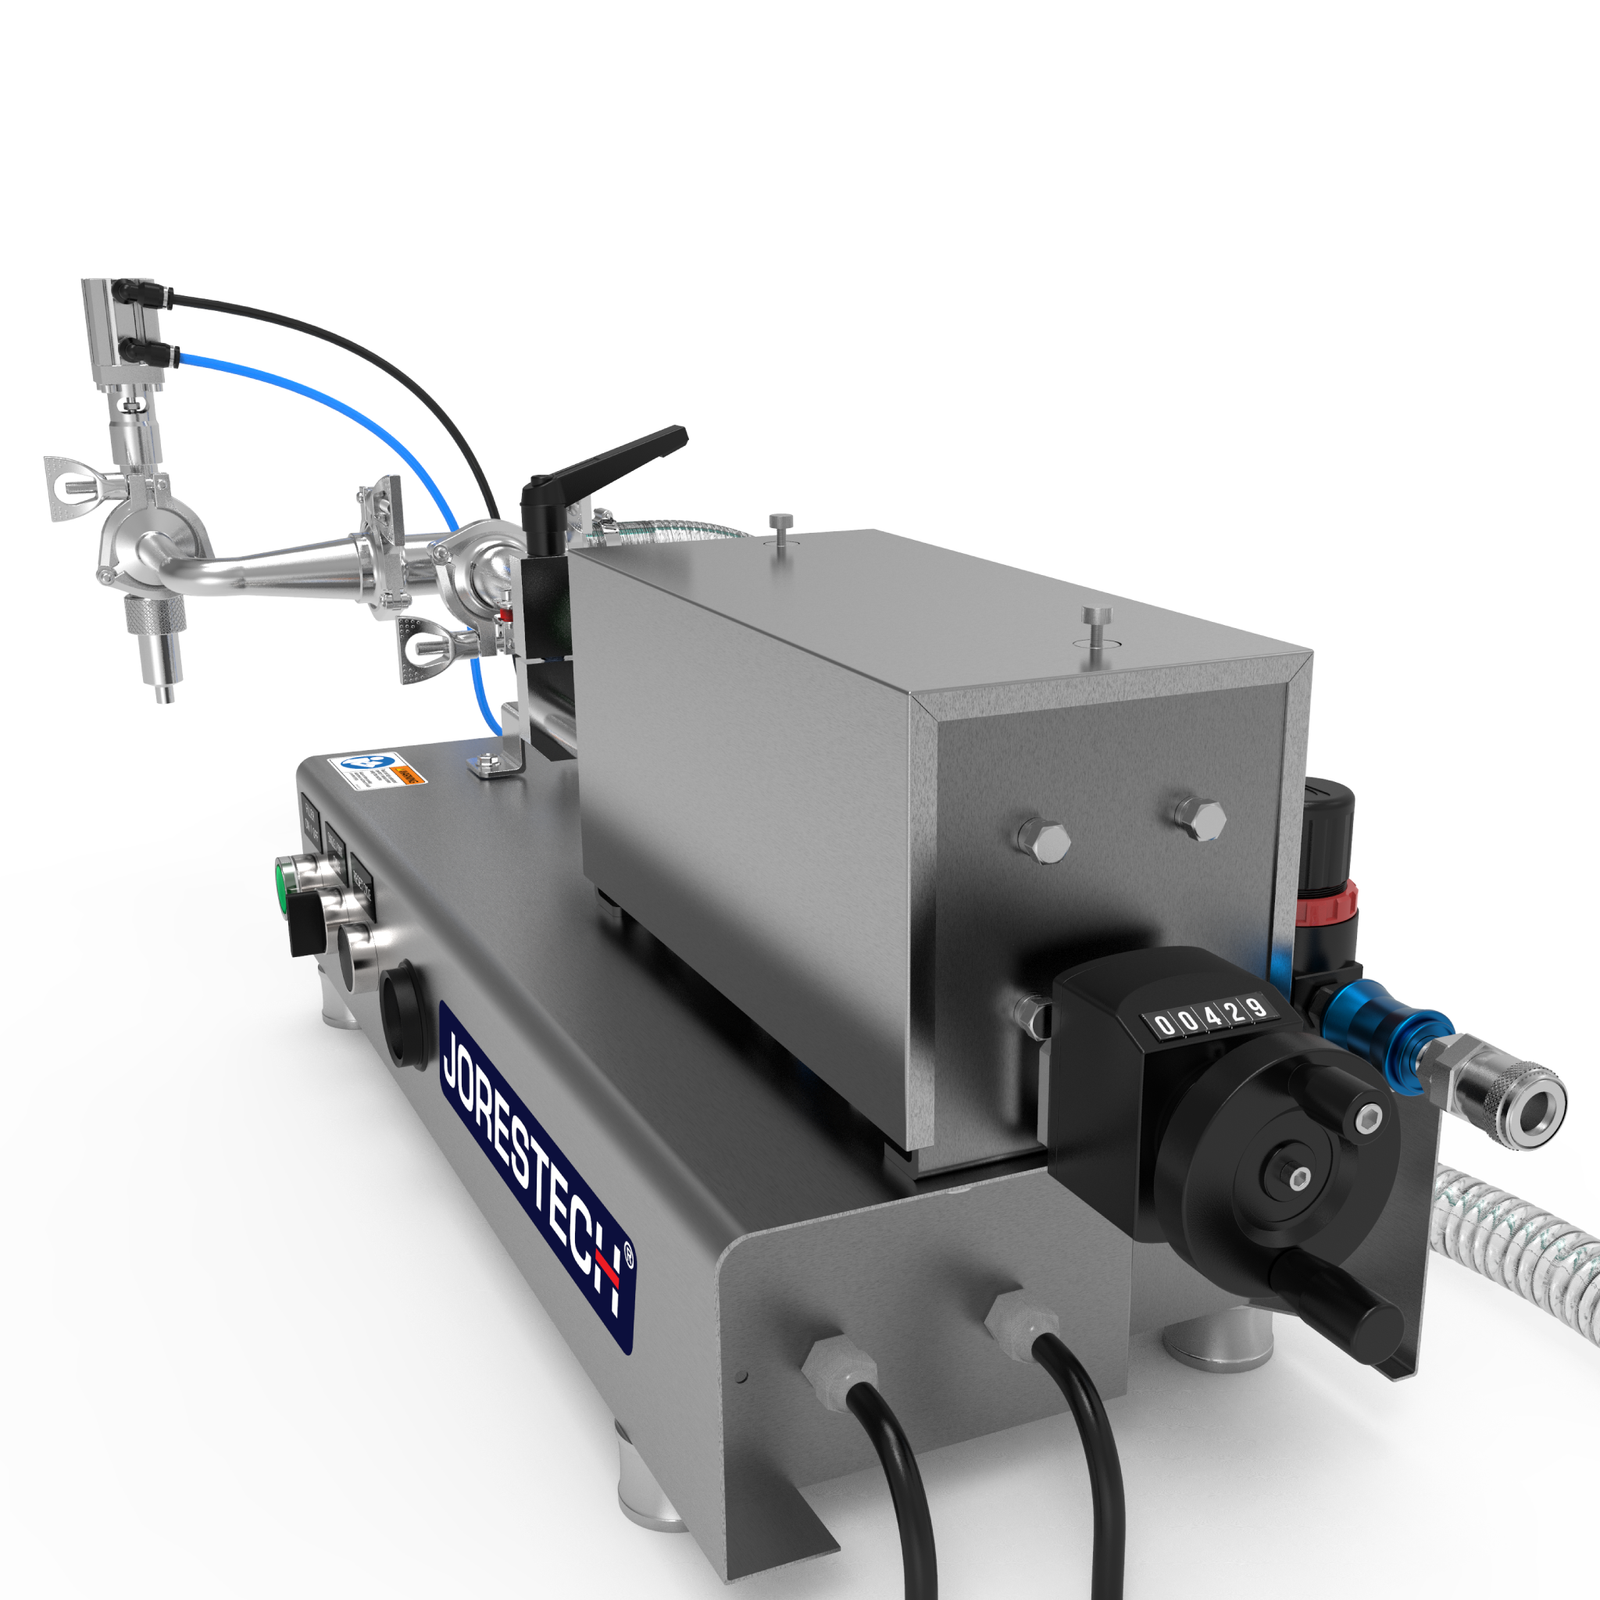 A Low viscosity JORES TECHNOLOGIES® liquid filling machine shown from the back. The fill volume adjuster, main input hose, and compressed air connector can be easily appreciated.